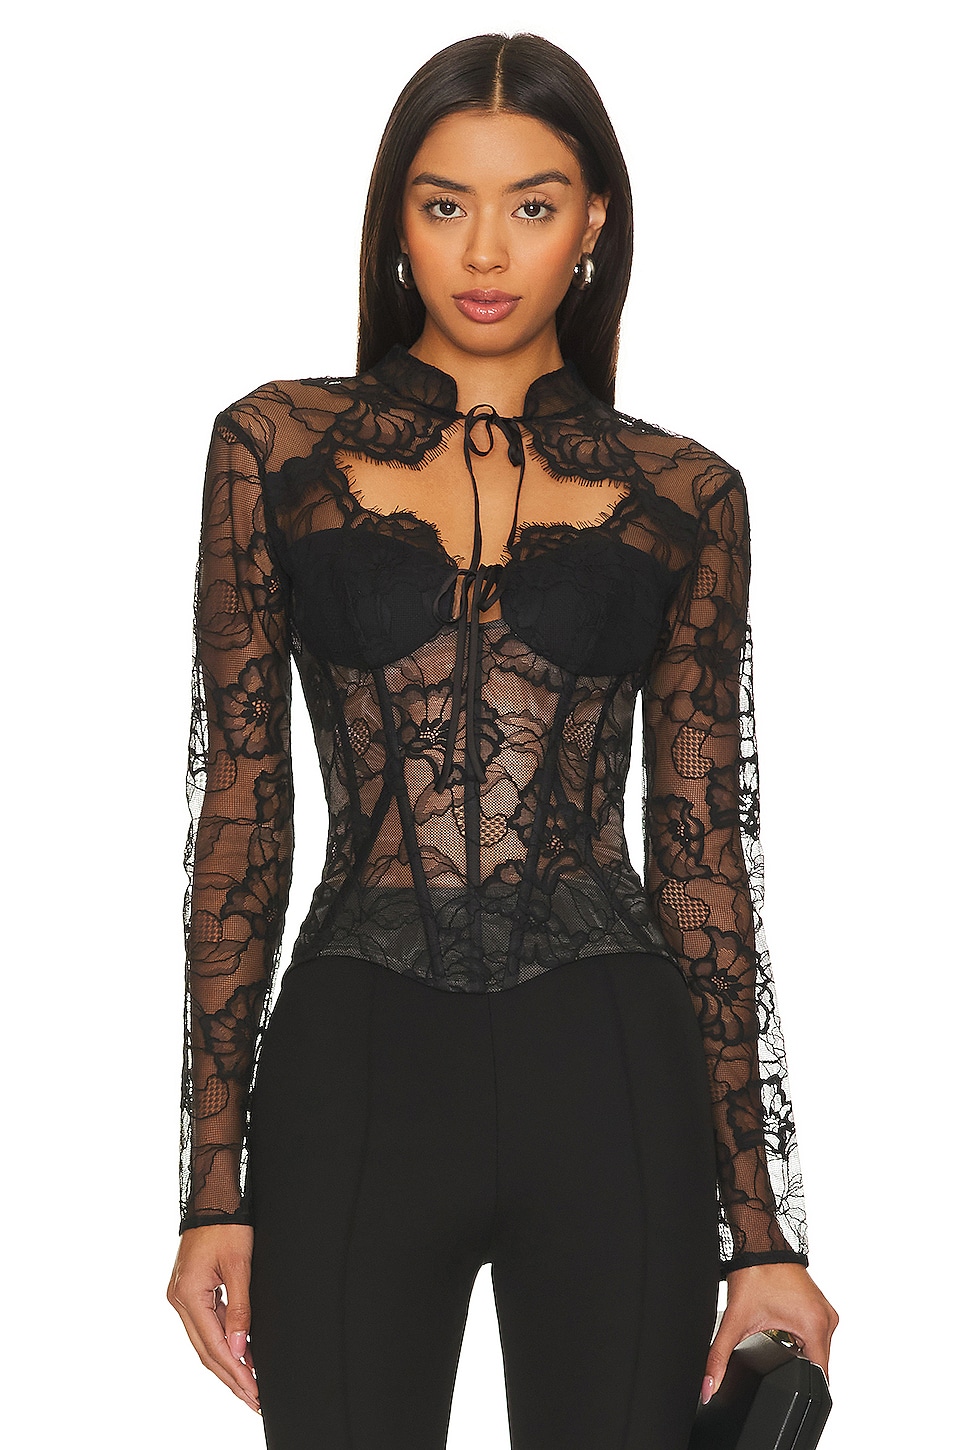 Lace Long Sleeve Bustier Top